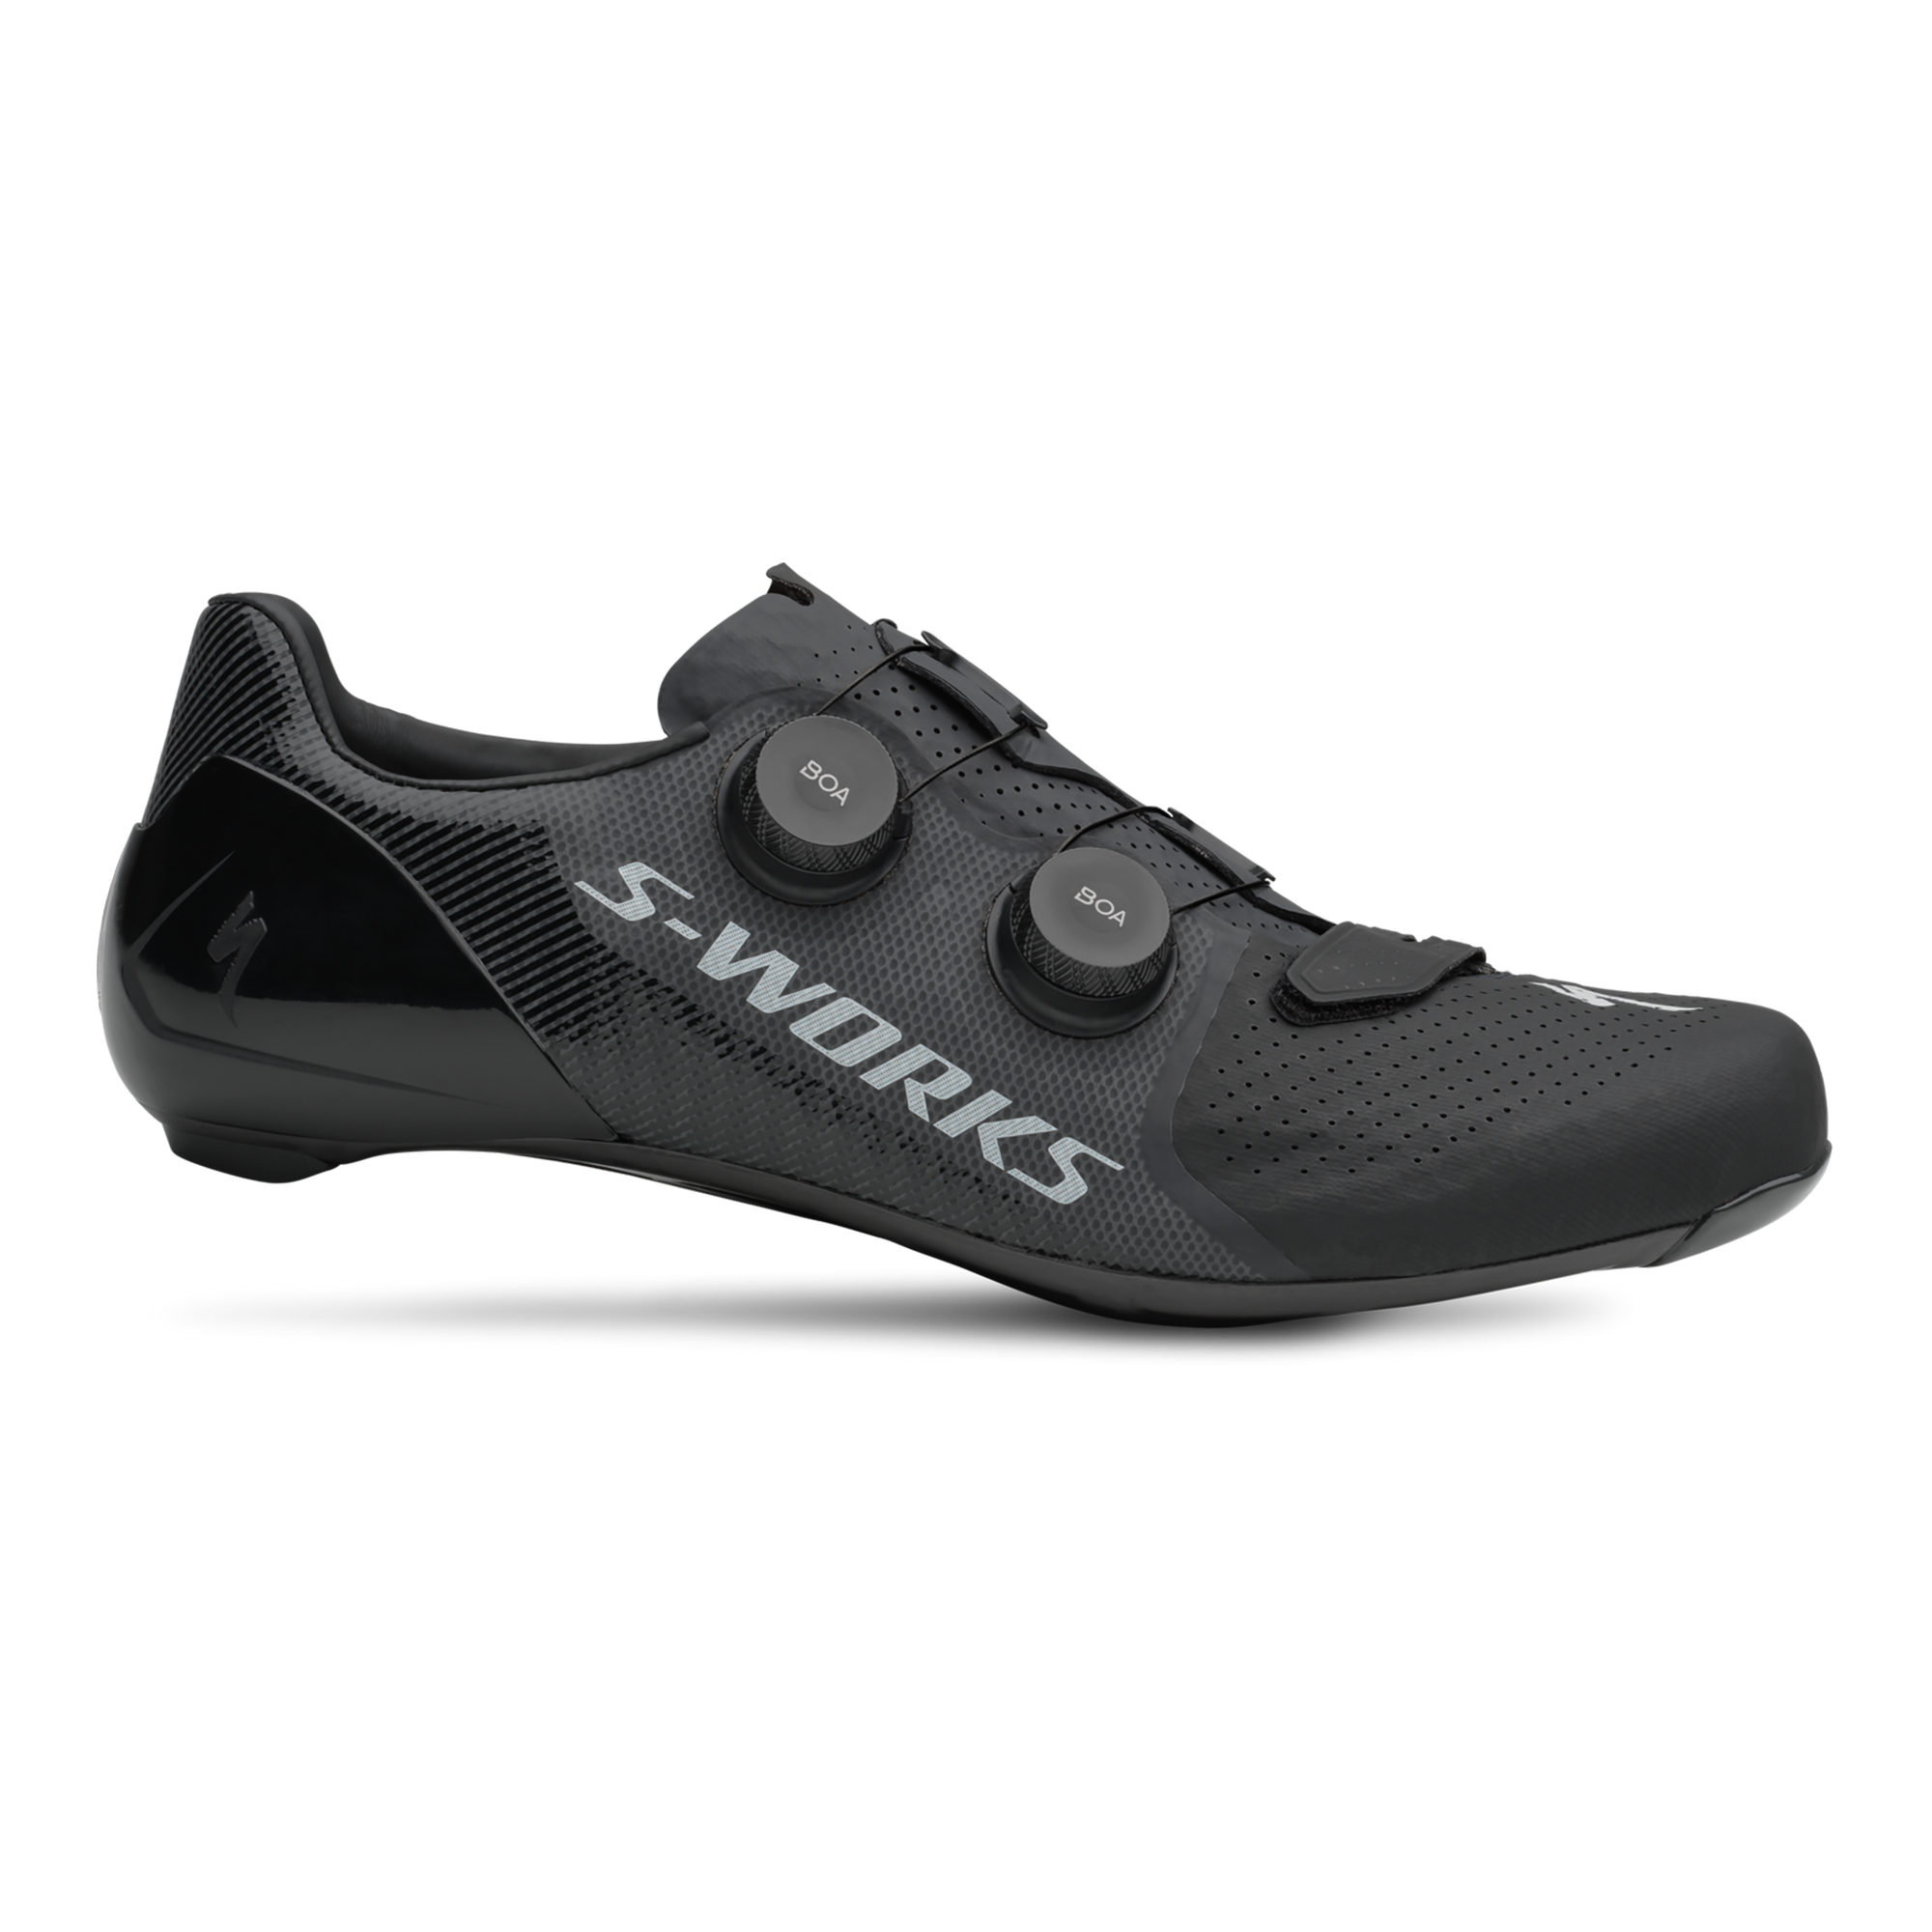 S-Works 7 Road Shoes